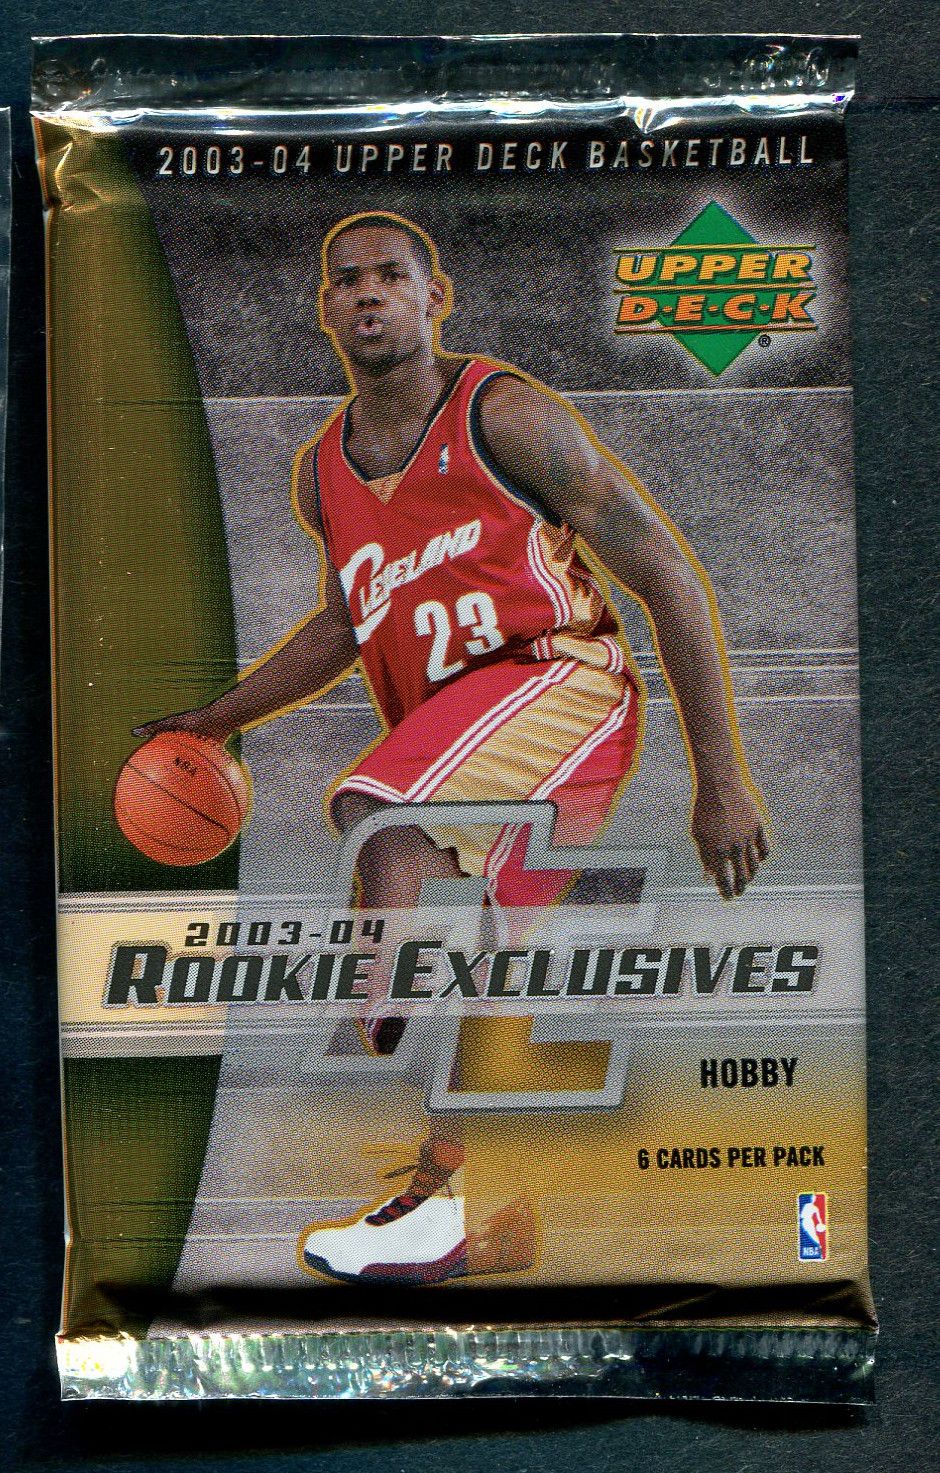 2003/04 Upper Deck Rookie Exclusives Basketball Unopened Pack (Hobby)